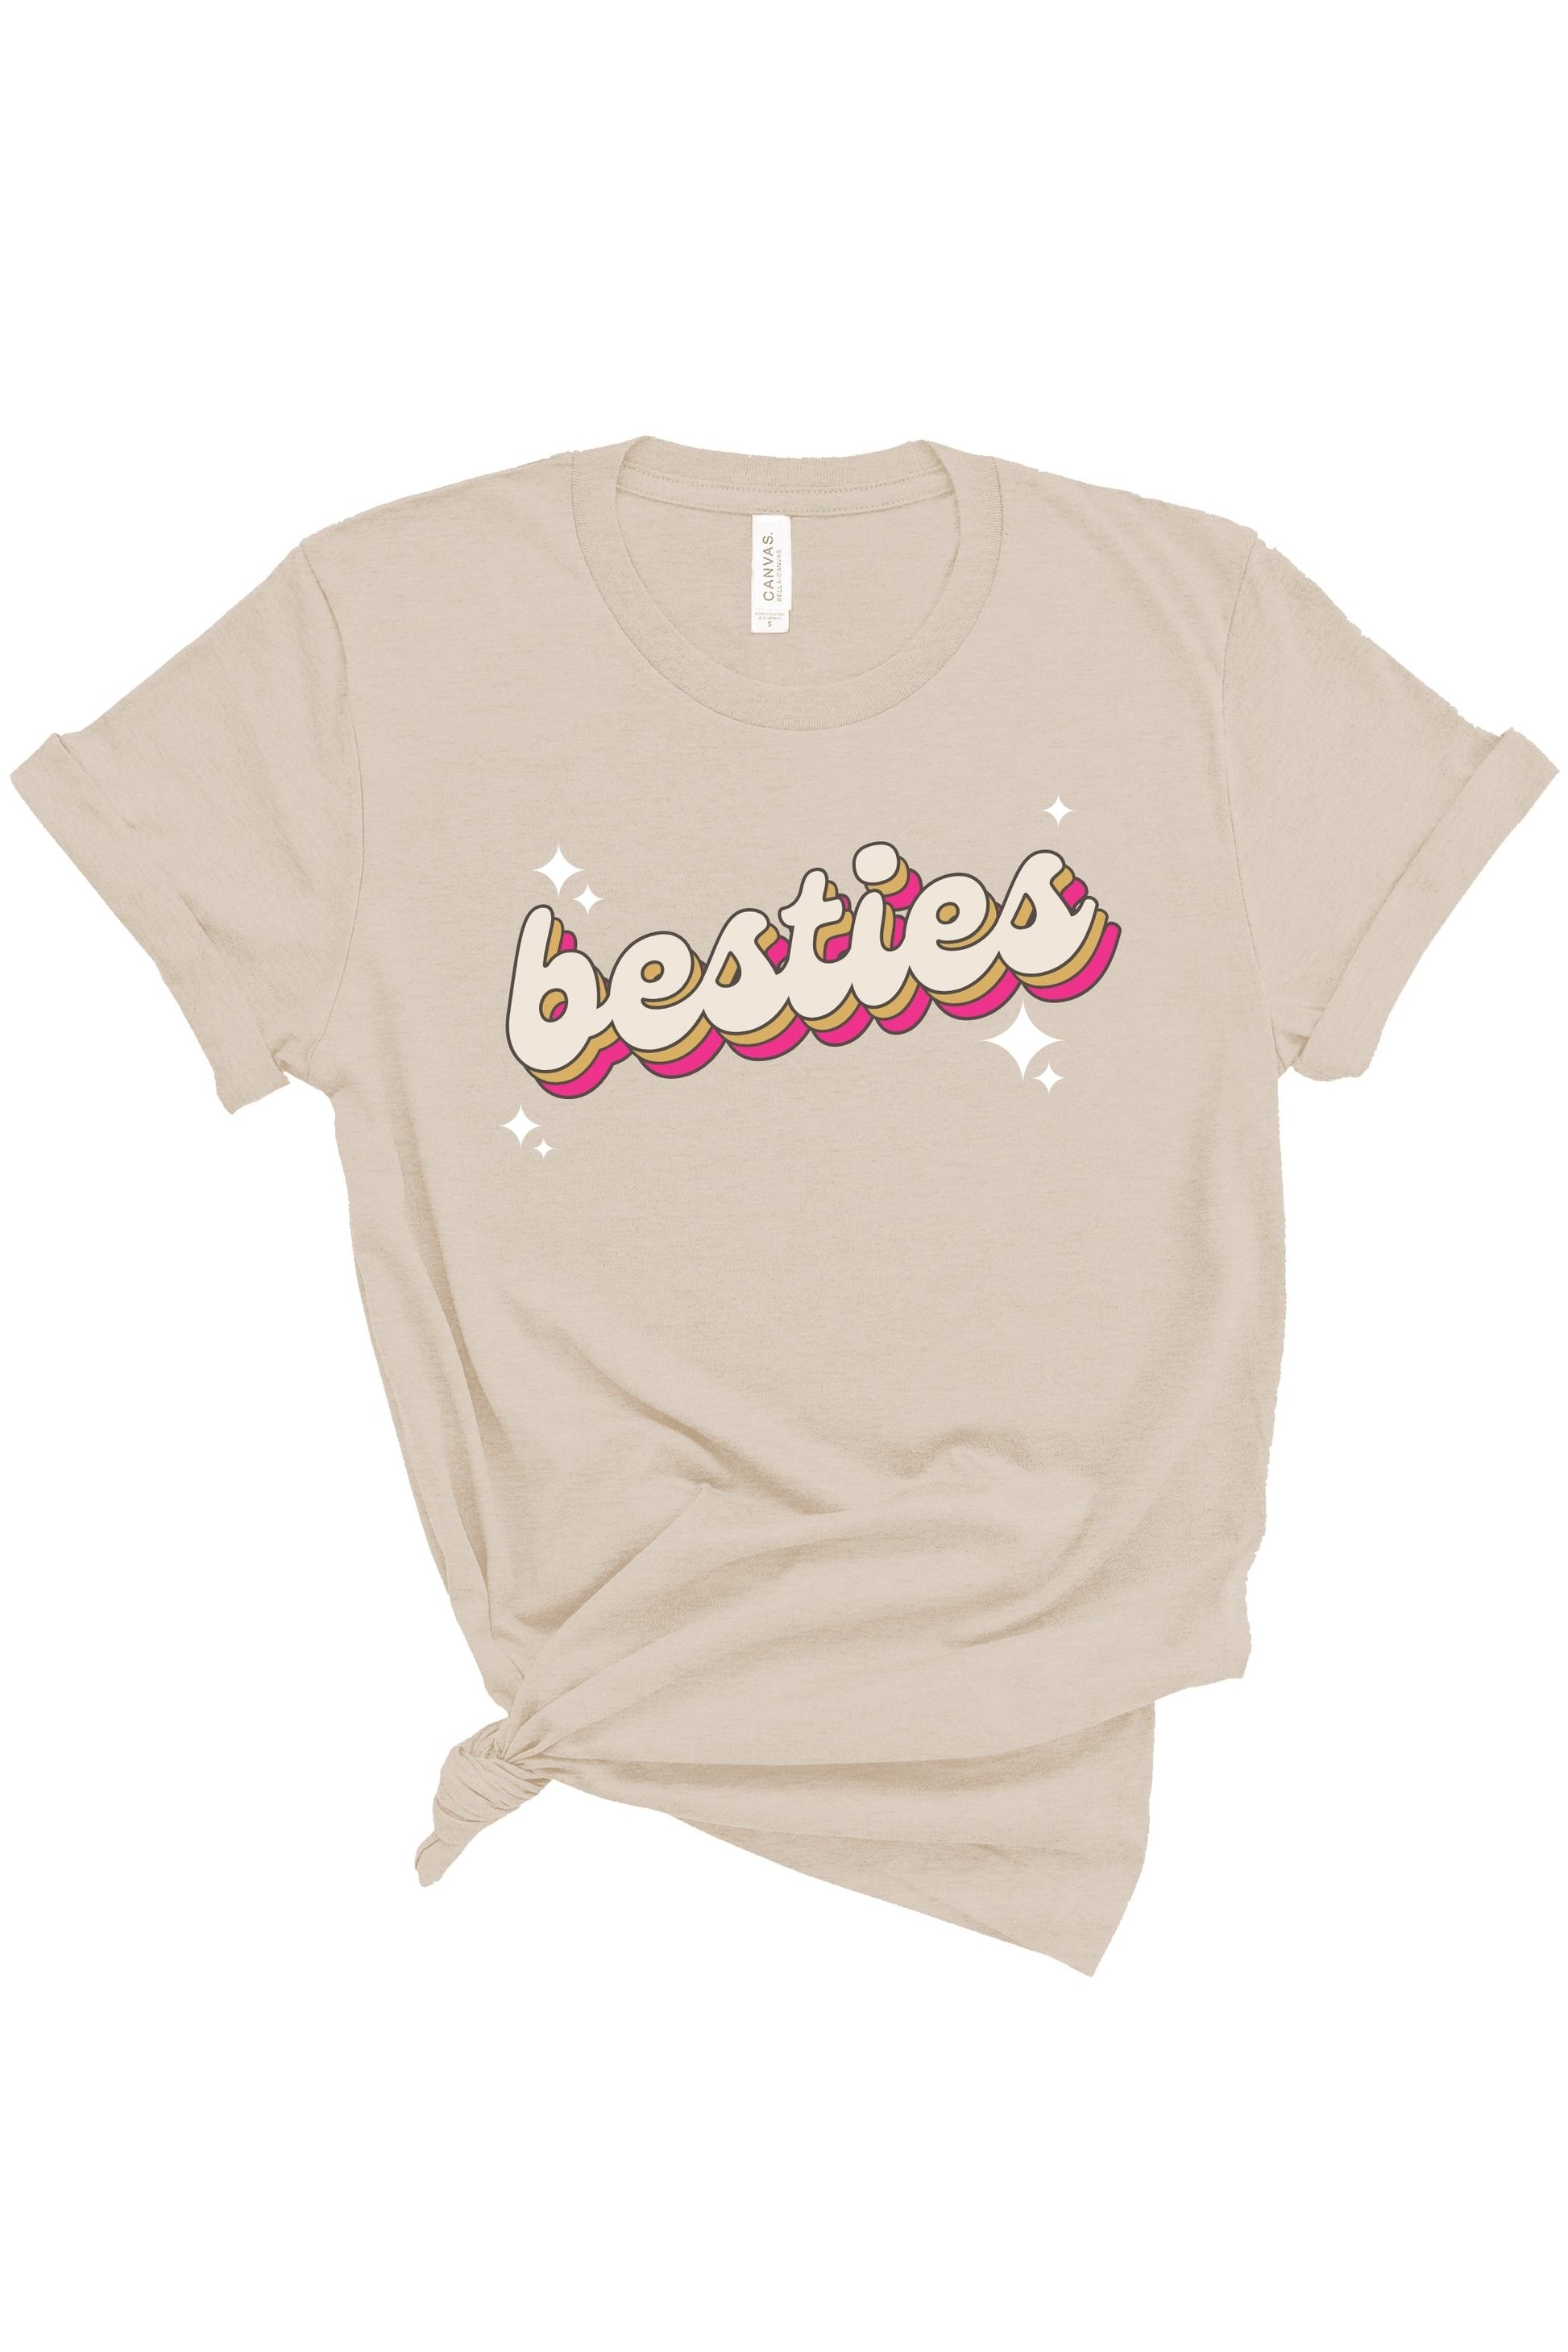 Besties | Tee | Adult-Sister Shirts-Sister Shirts, Cute & Custom Tees for Mama & Littles in Trussville, Alabama.